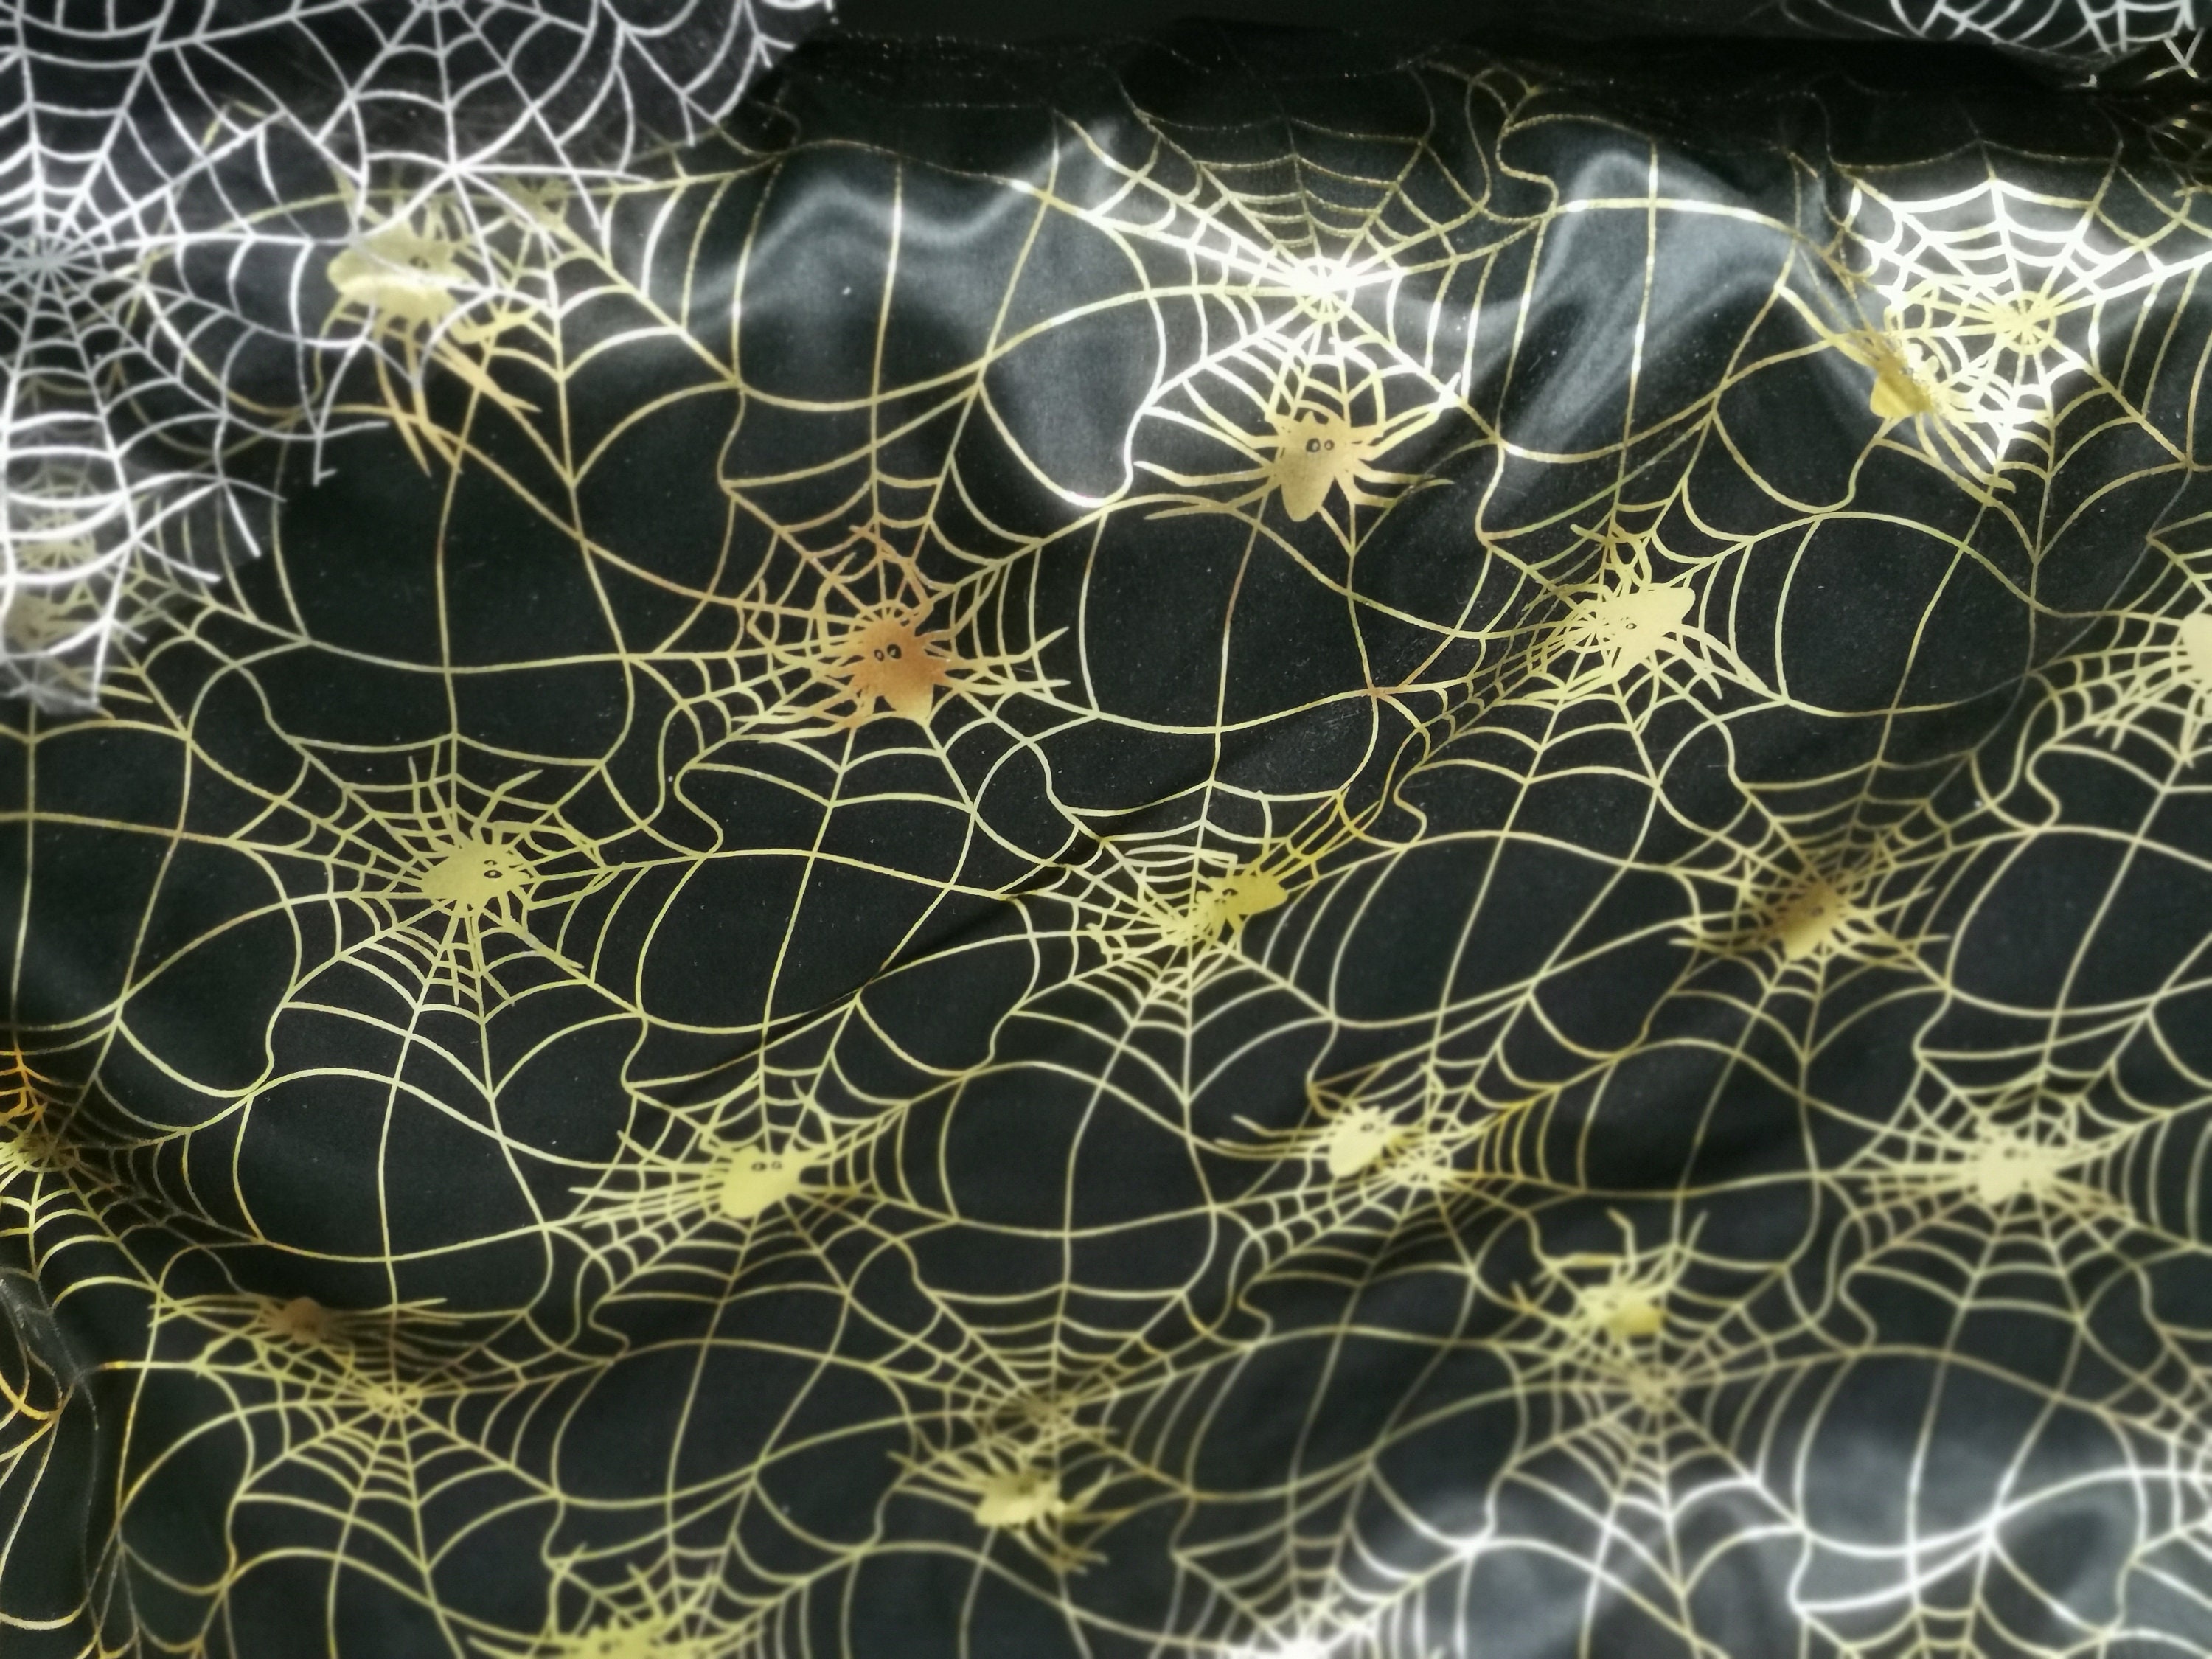 Spider web fabric Spiderweb Glow in stain fabric spider web | Etsy